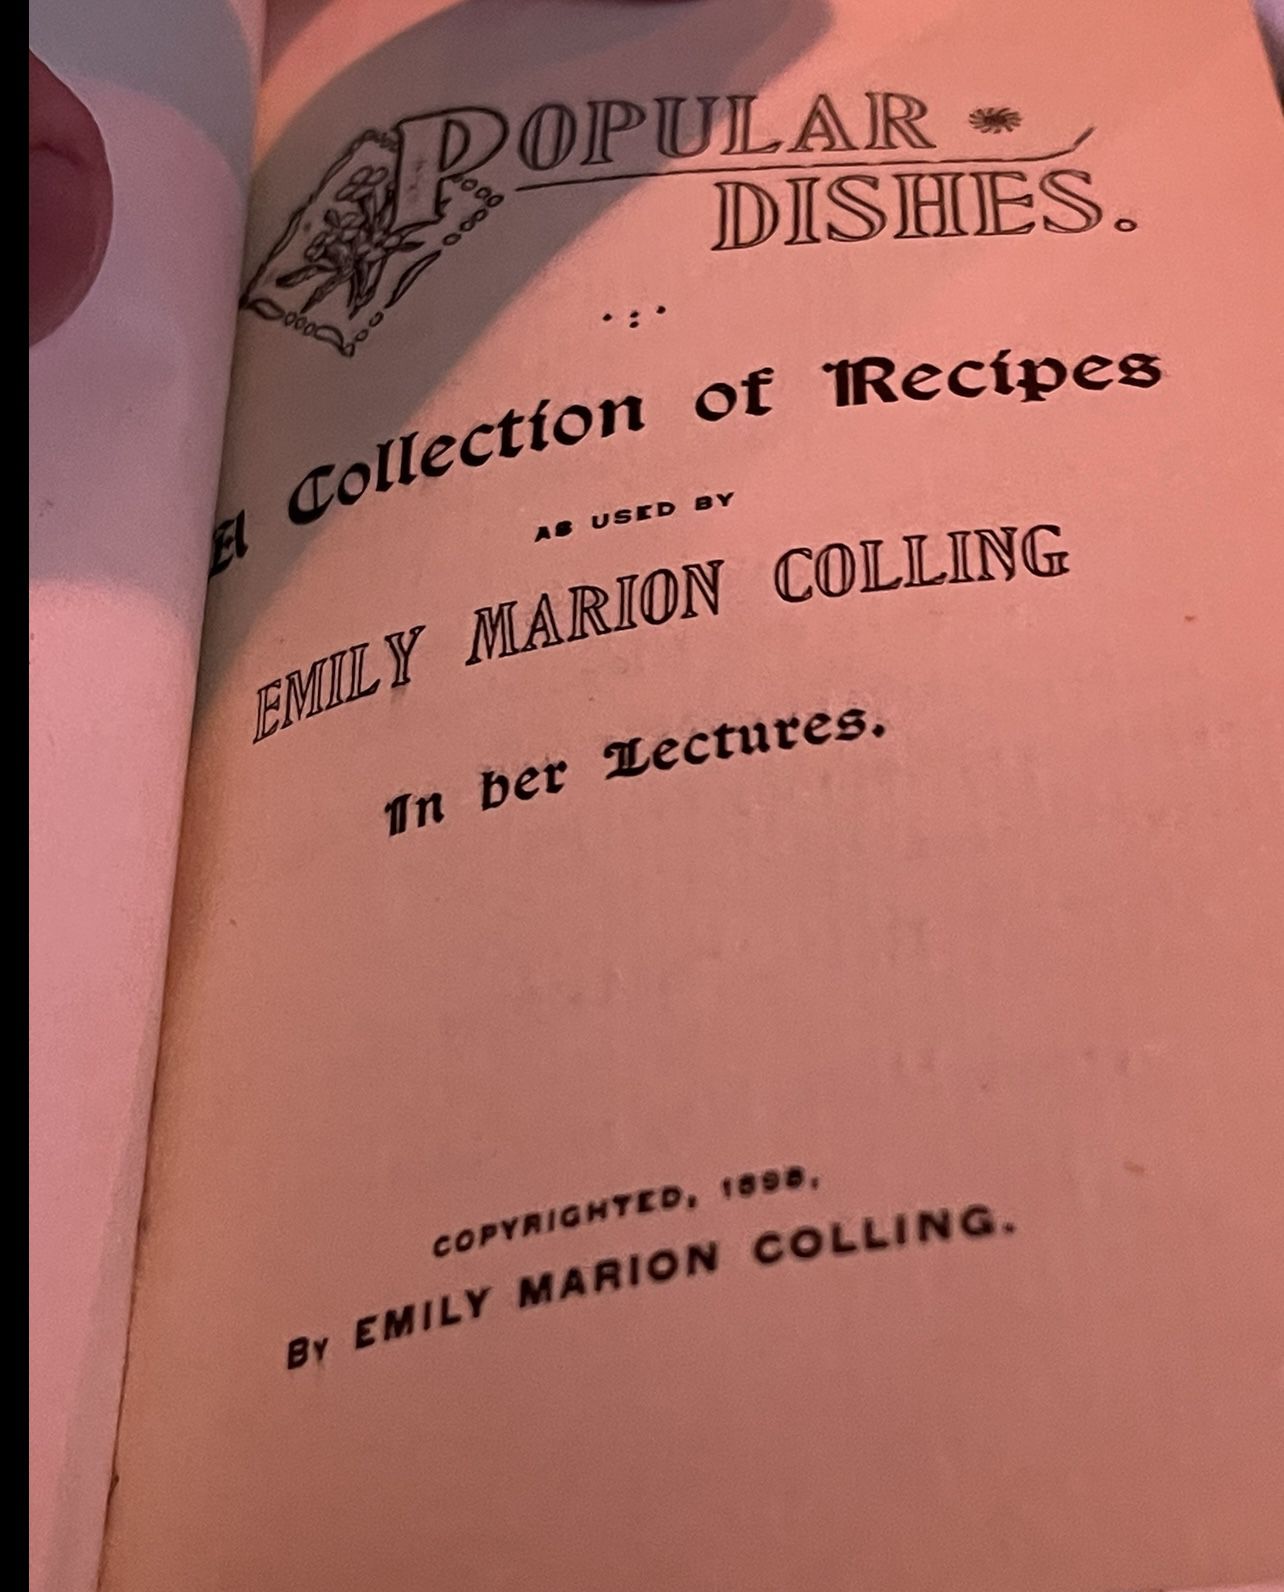 1898 "POPULAR DISHES" COOK BOOK BY EMILY MARION COLLING